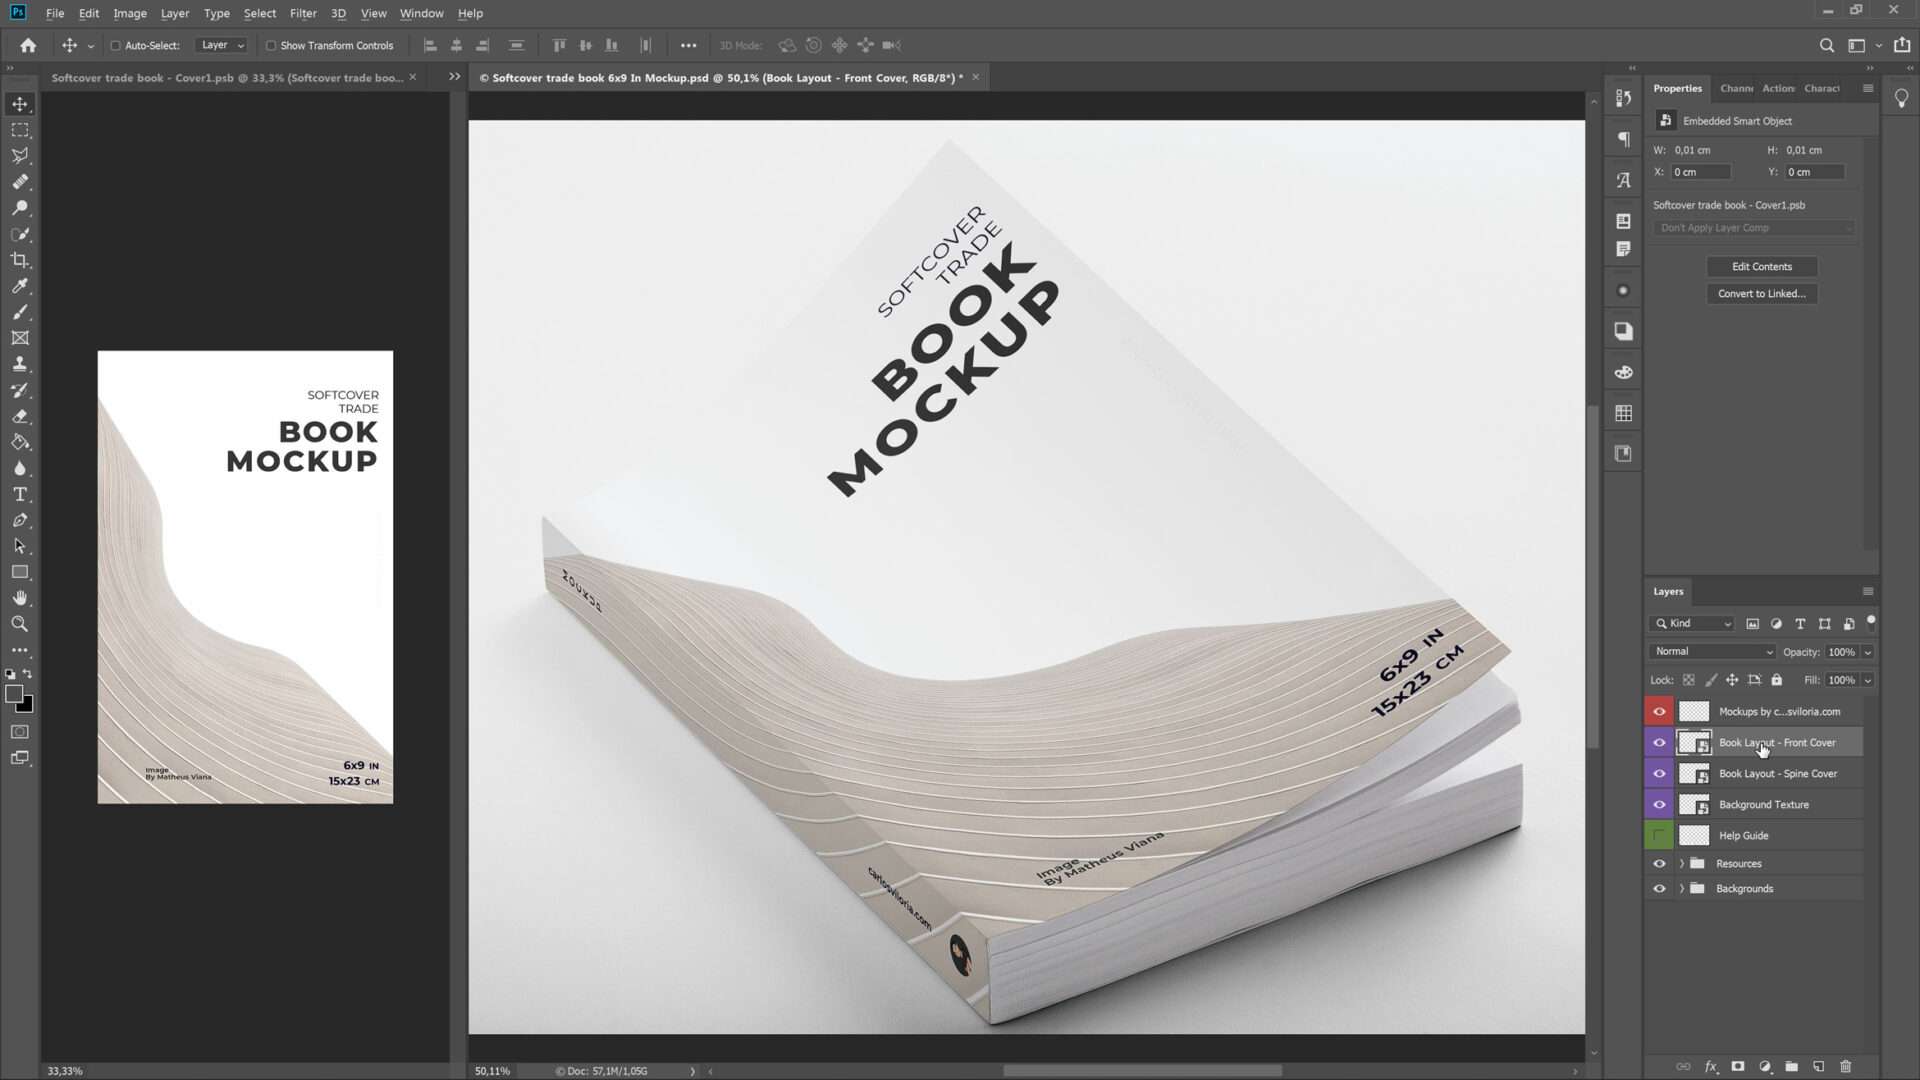 Softcover trade book 6x9 In mockup